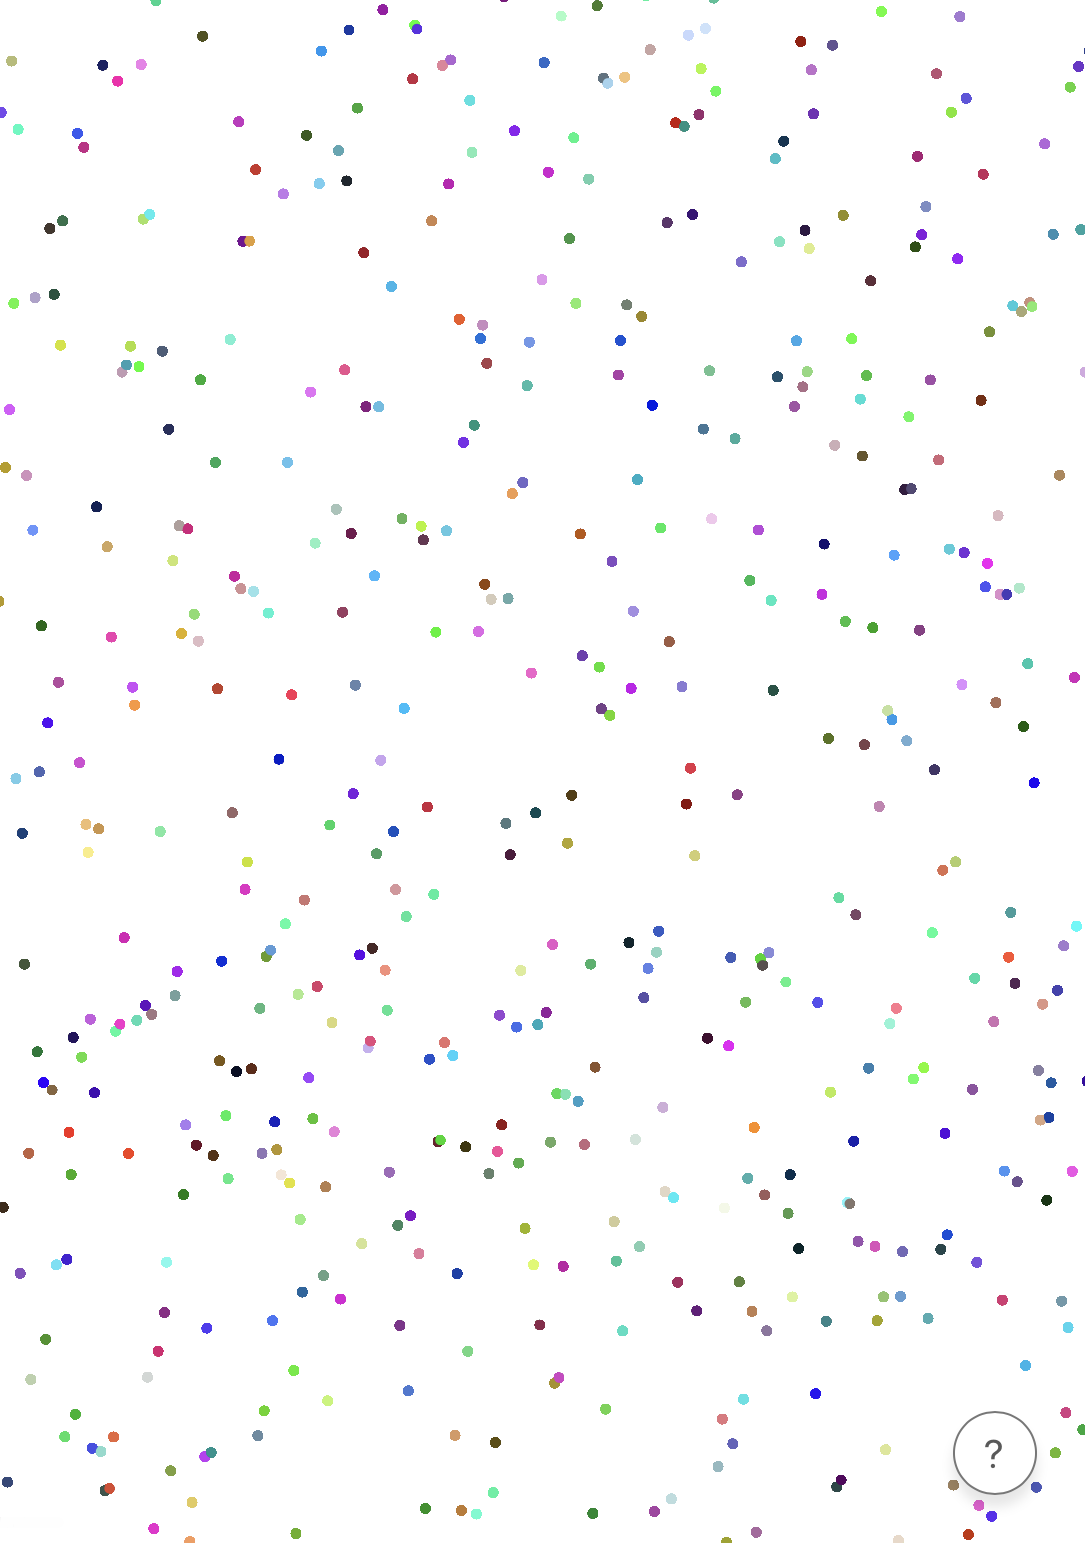 Colorful particles randomly scattered on a white canvas